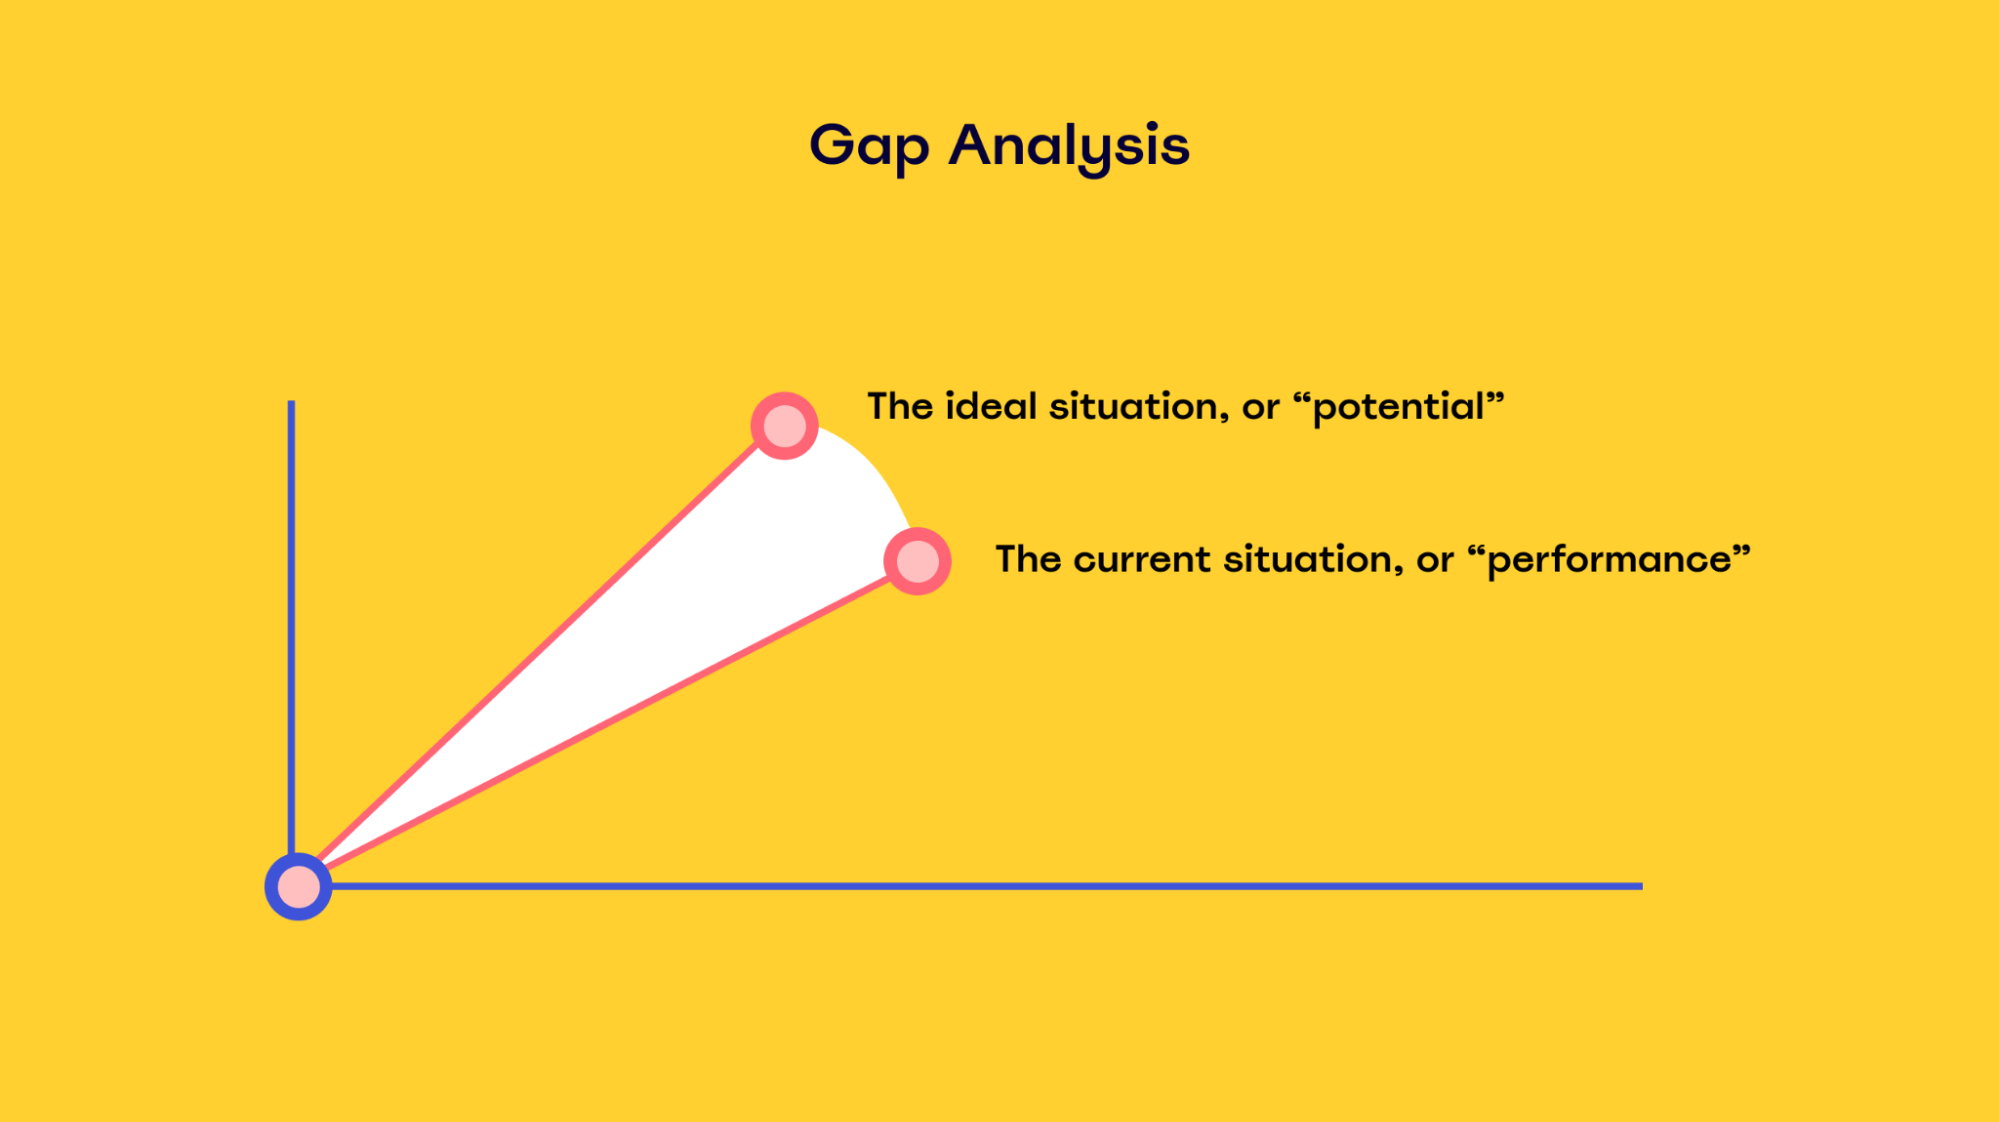 Visual of a gap analysis, showing how the gap is created by the current situation and the ideal situation.